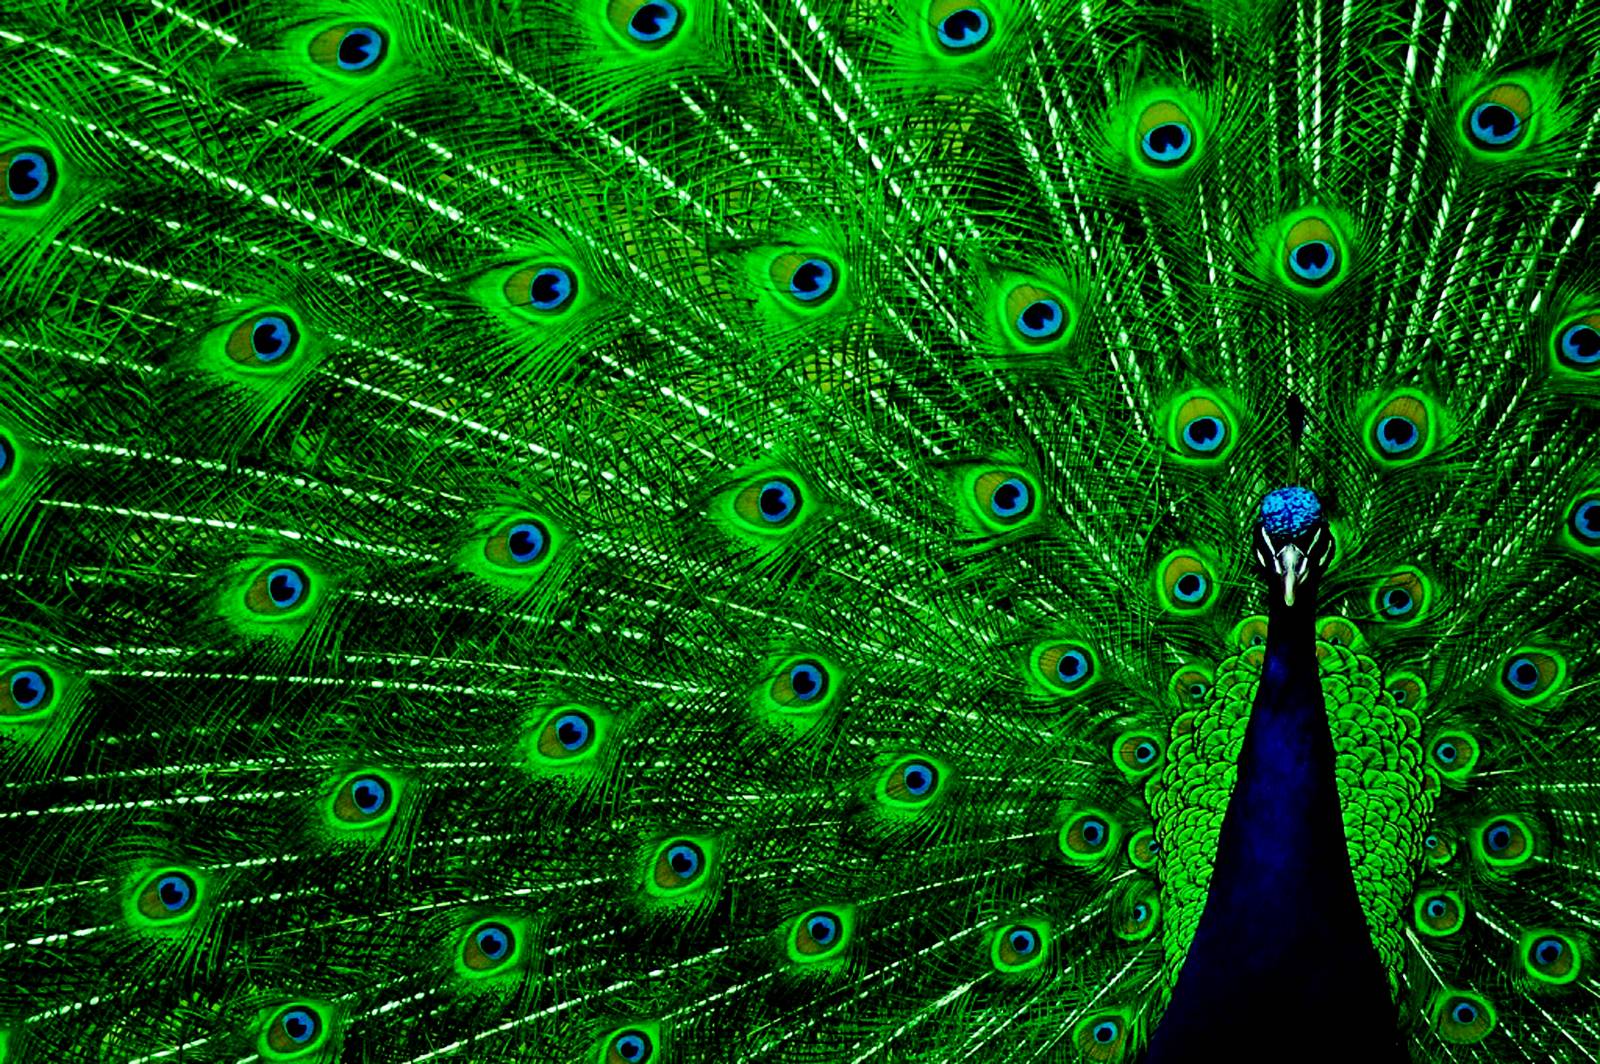 colorful peacock feathers wallpaper